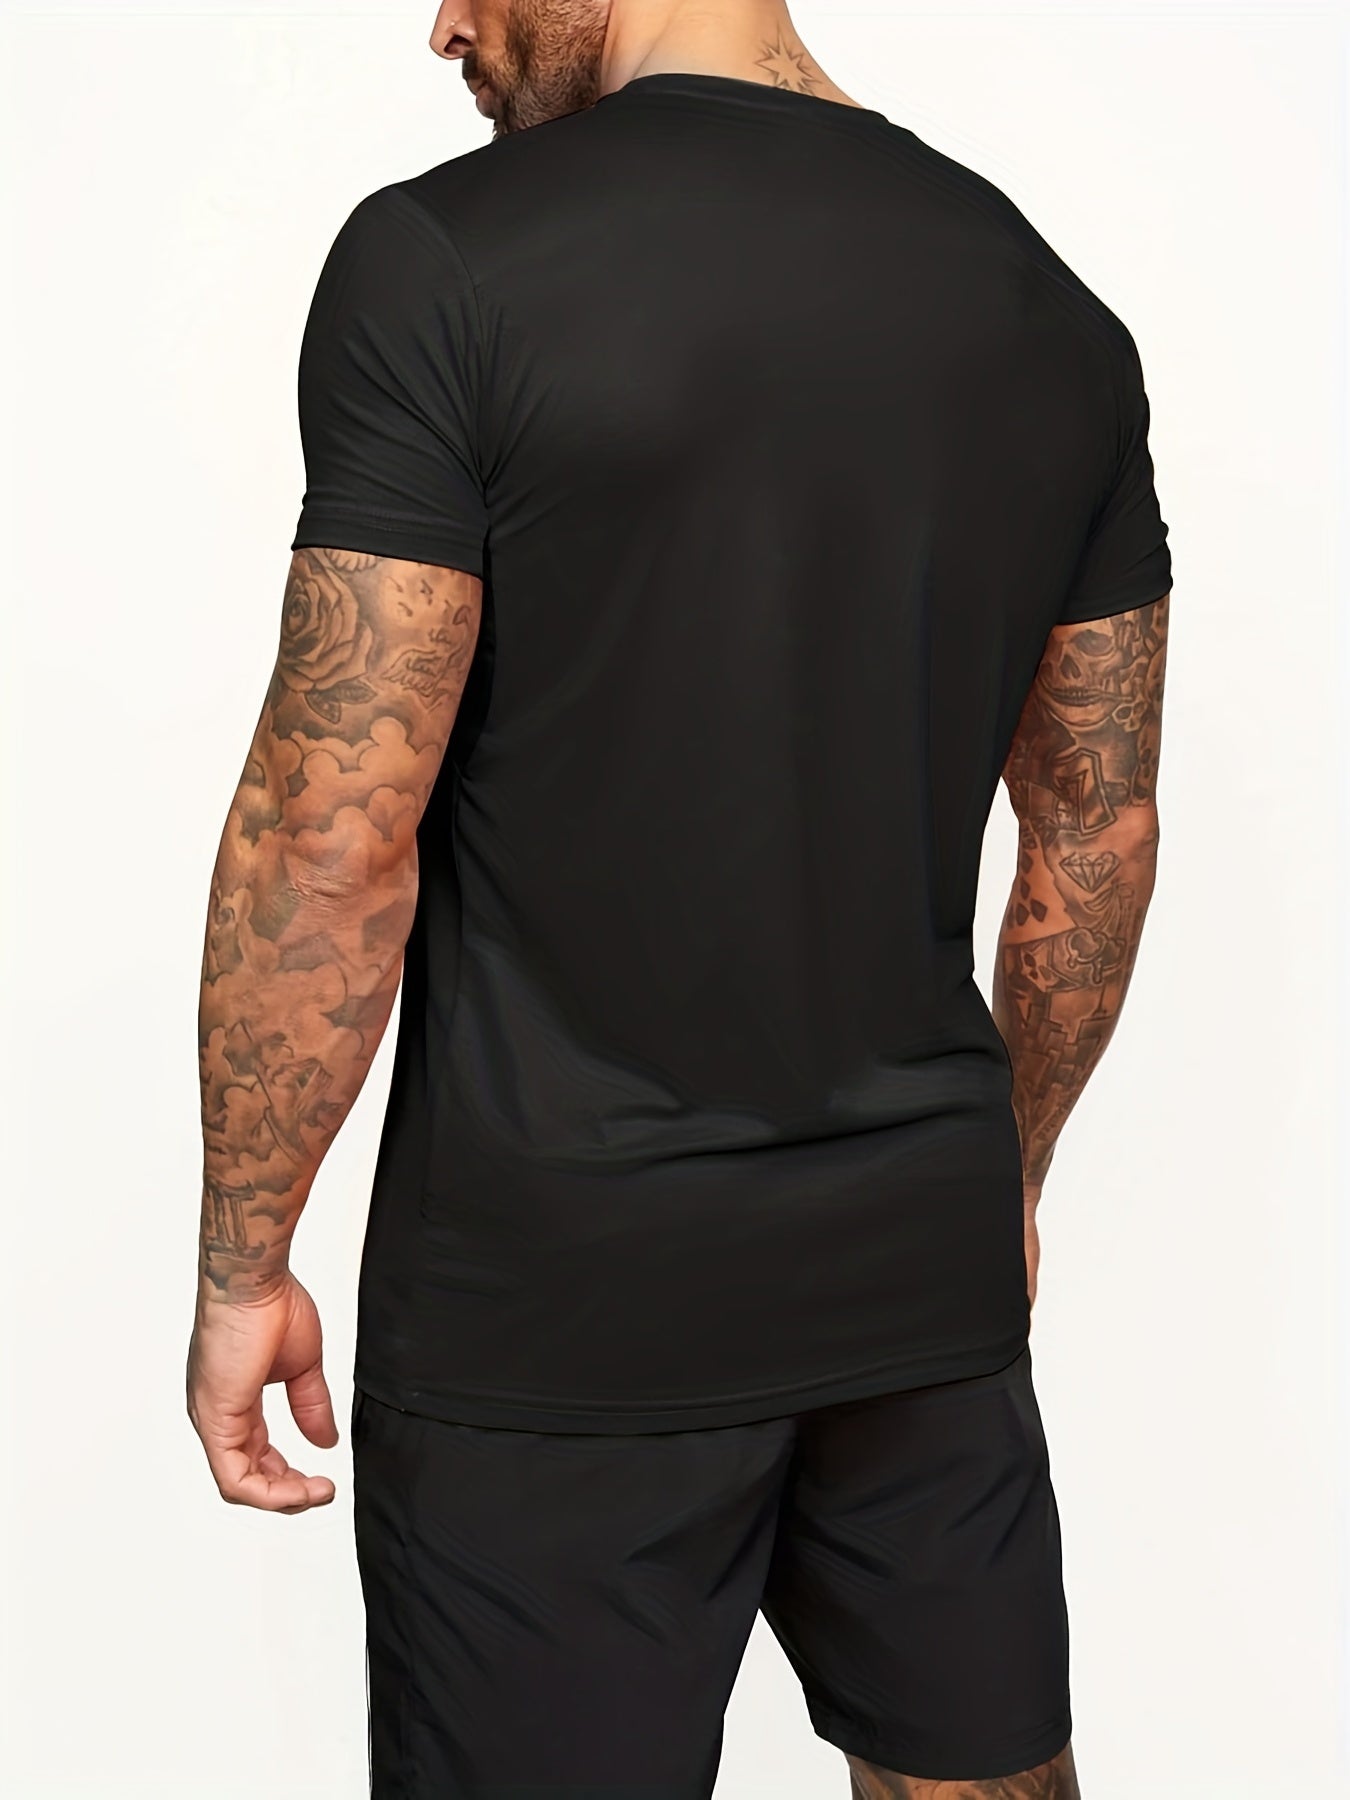 Classic Design Black Solid Top Casual Mid Stretch Short Sleeve Crew Neck Graphic T-shirt, Men's Tee For Summer Outdoor